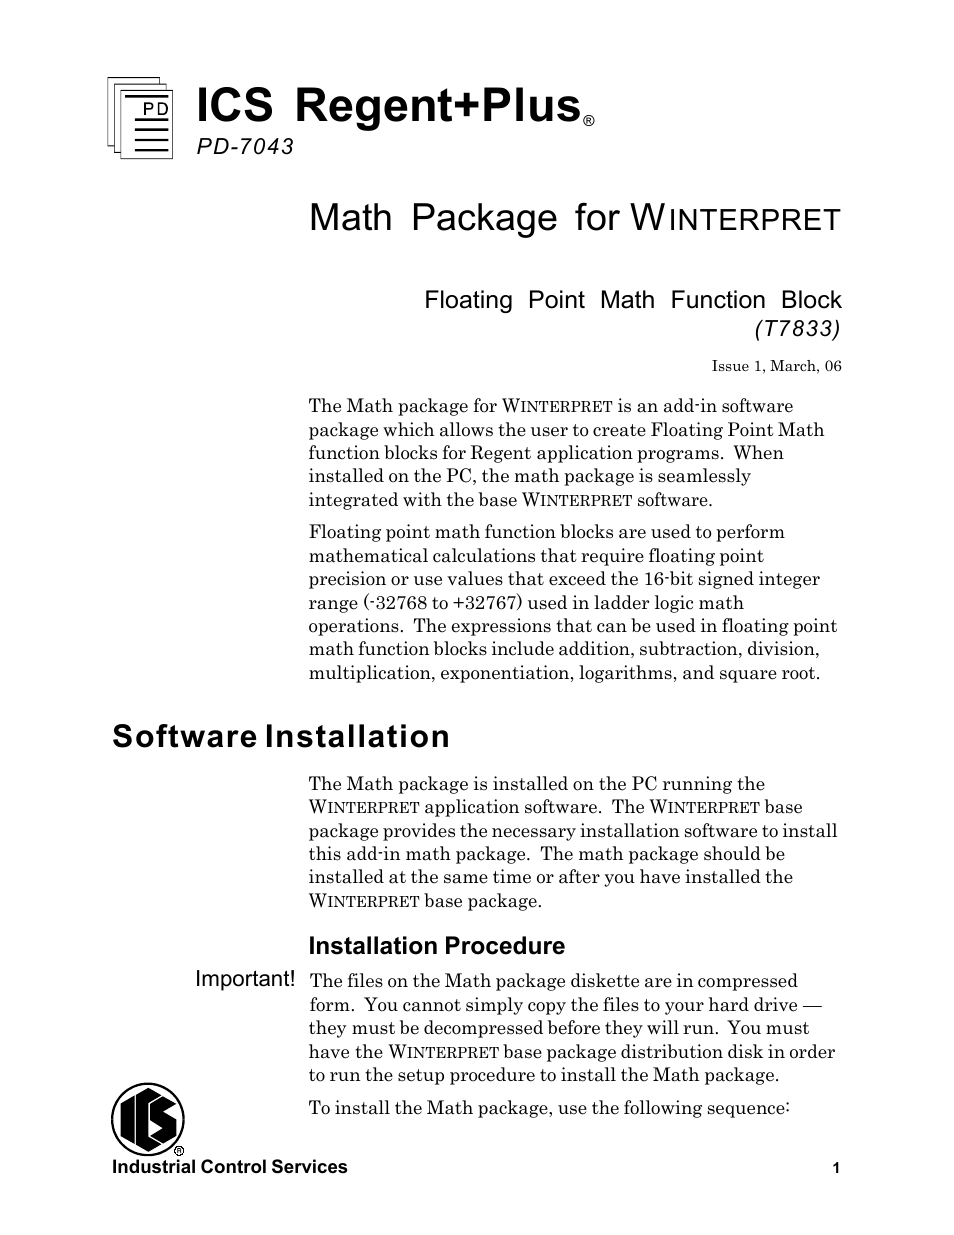 Rockwell Automation T7833 ICS Regent+Plus Math Package for Winternet User Manual | 26 pages